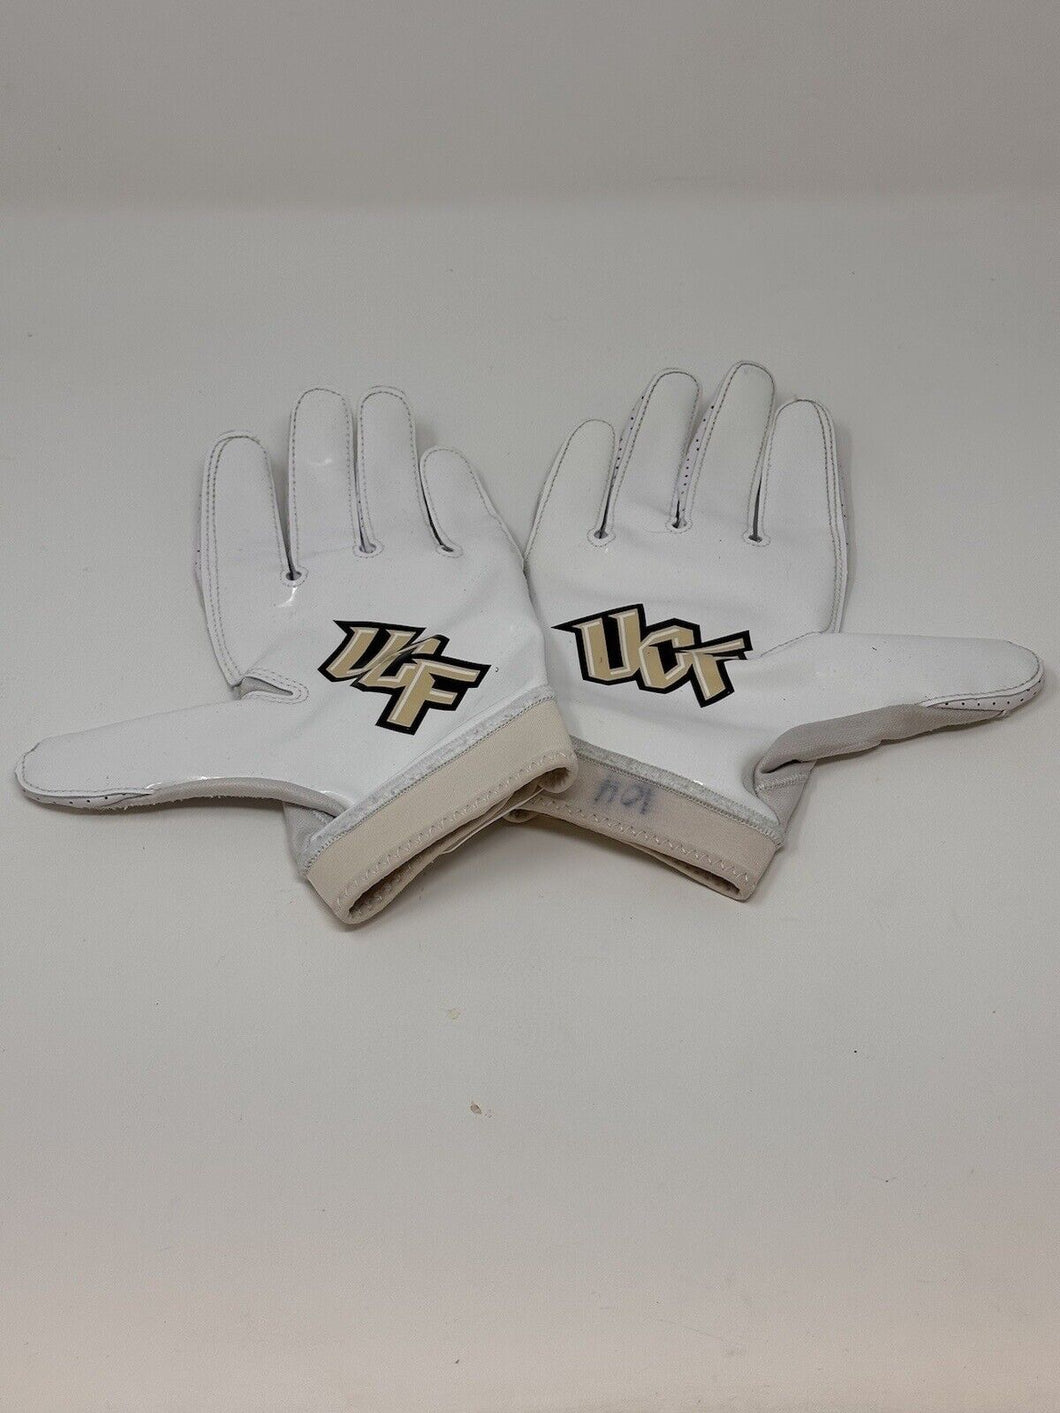 UCF Knights Game Used Nike Vapor Knit Football Gloves - Size 3XL